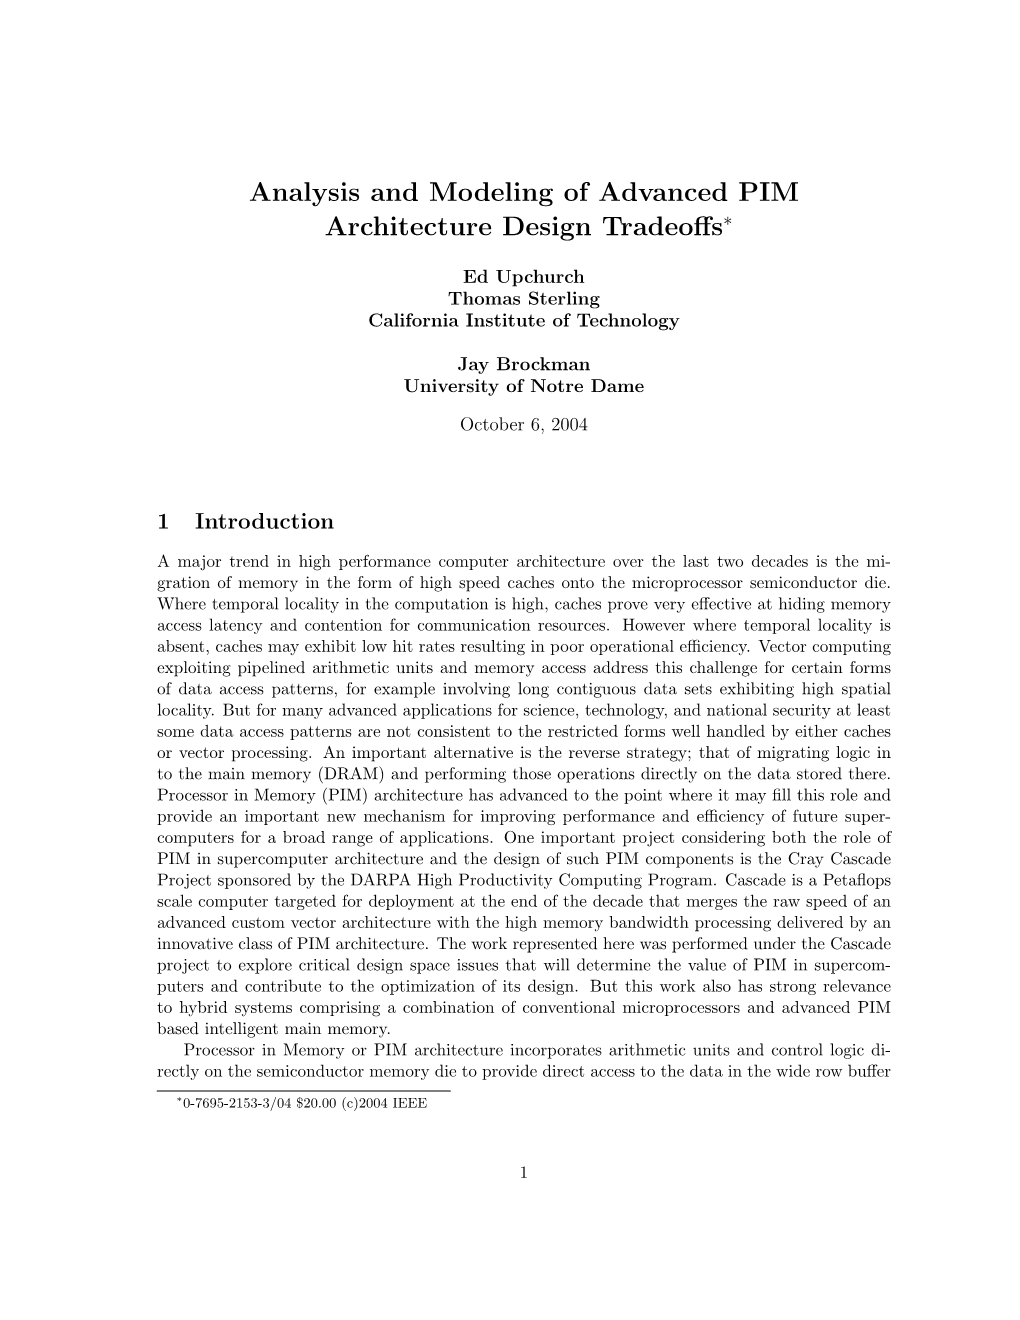 Analysis and Modeling of Advanced PIM Architecture Design Tradeoffs